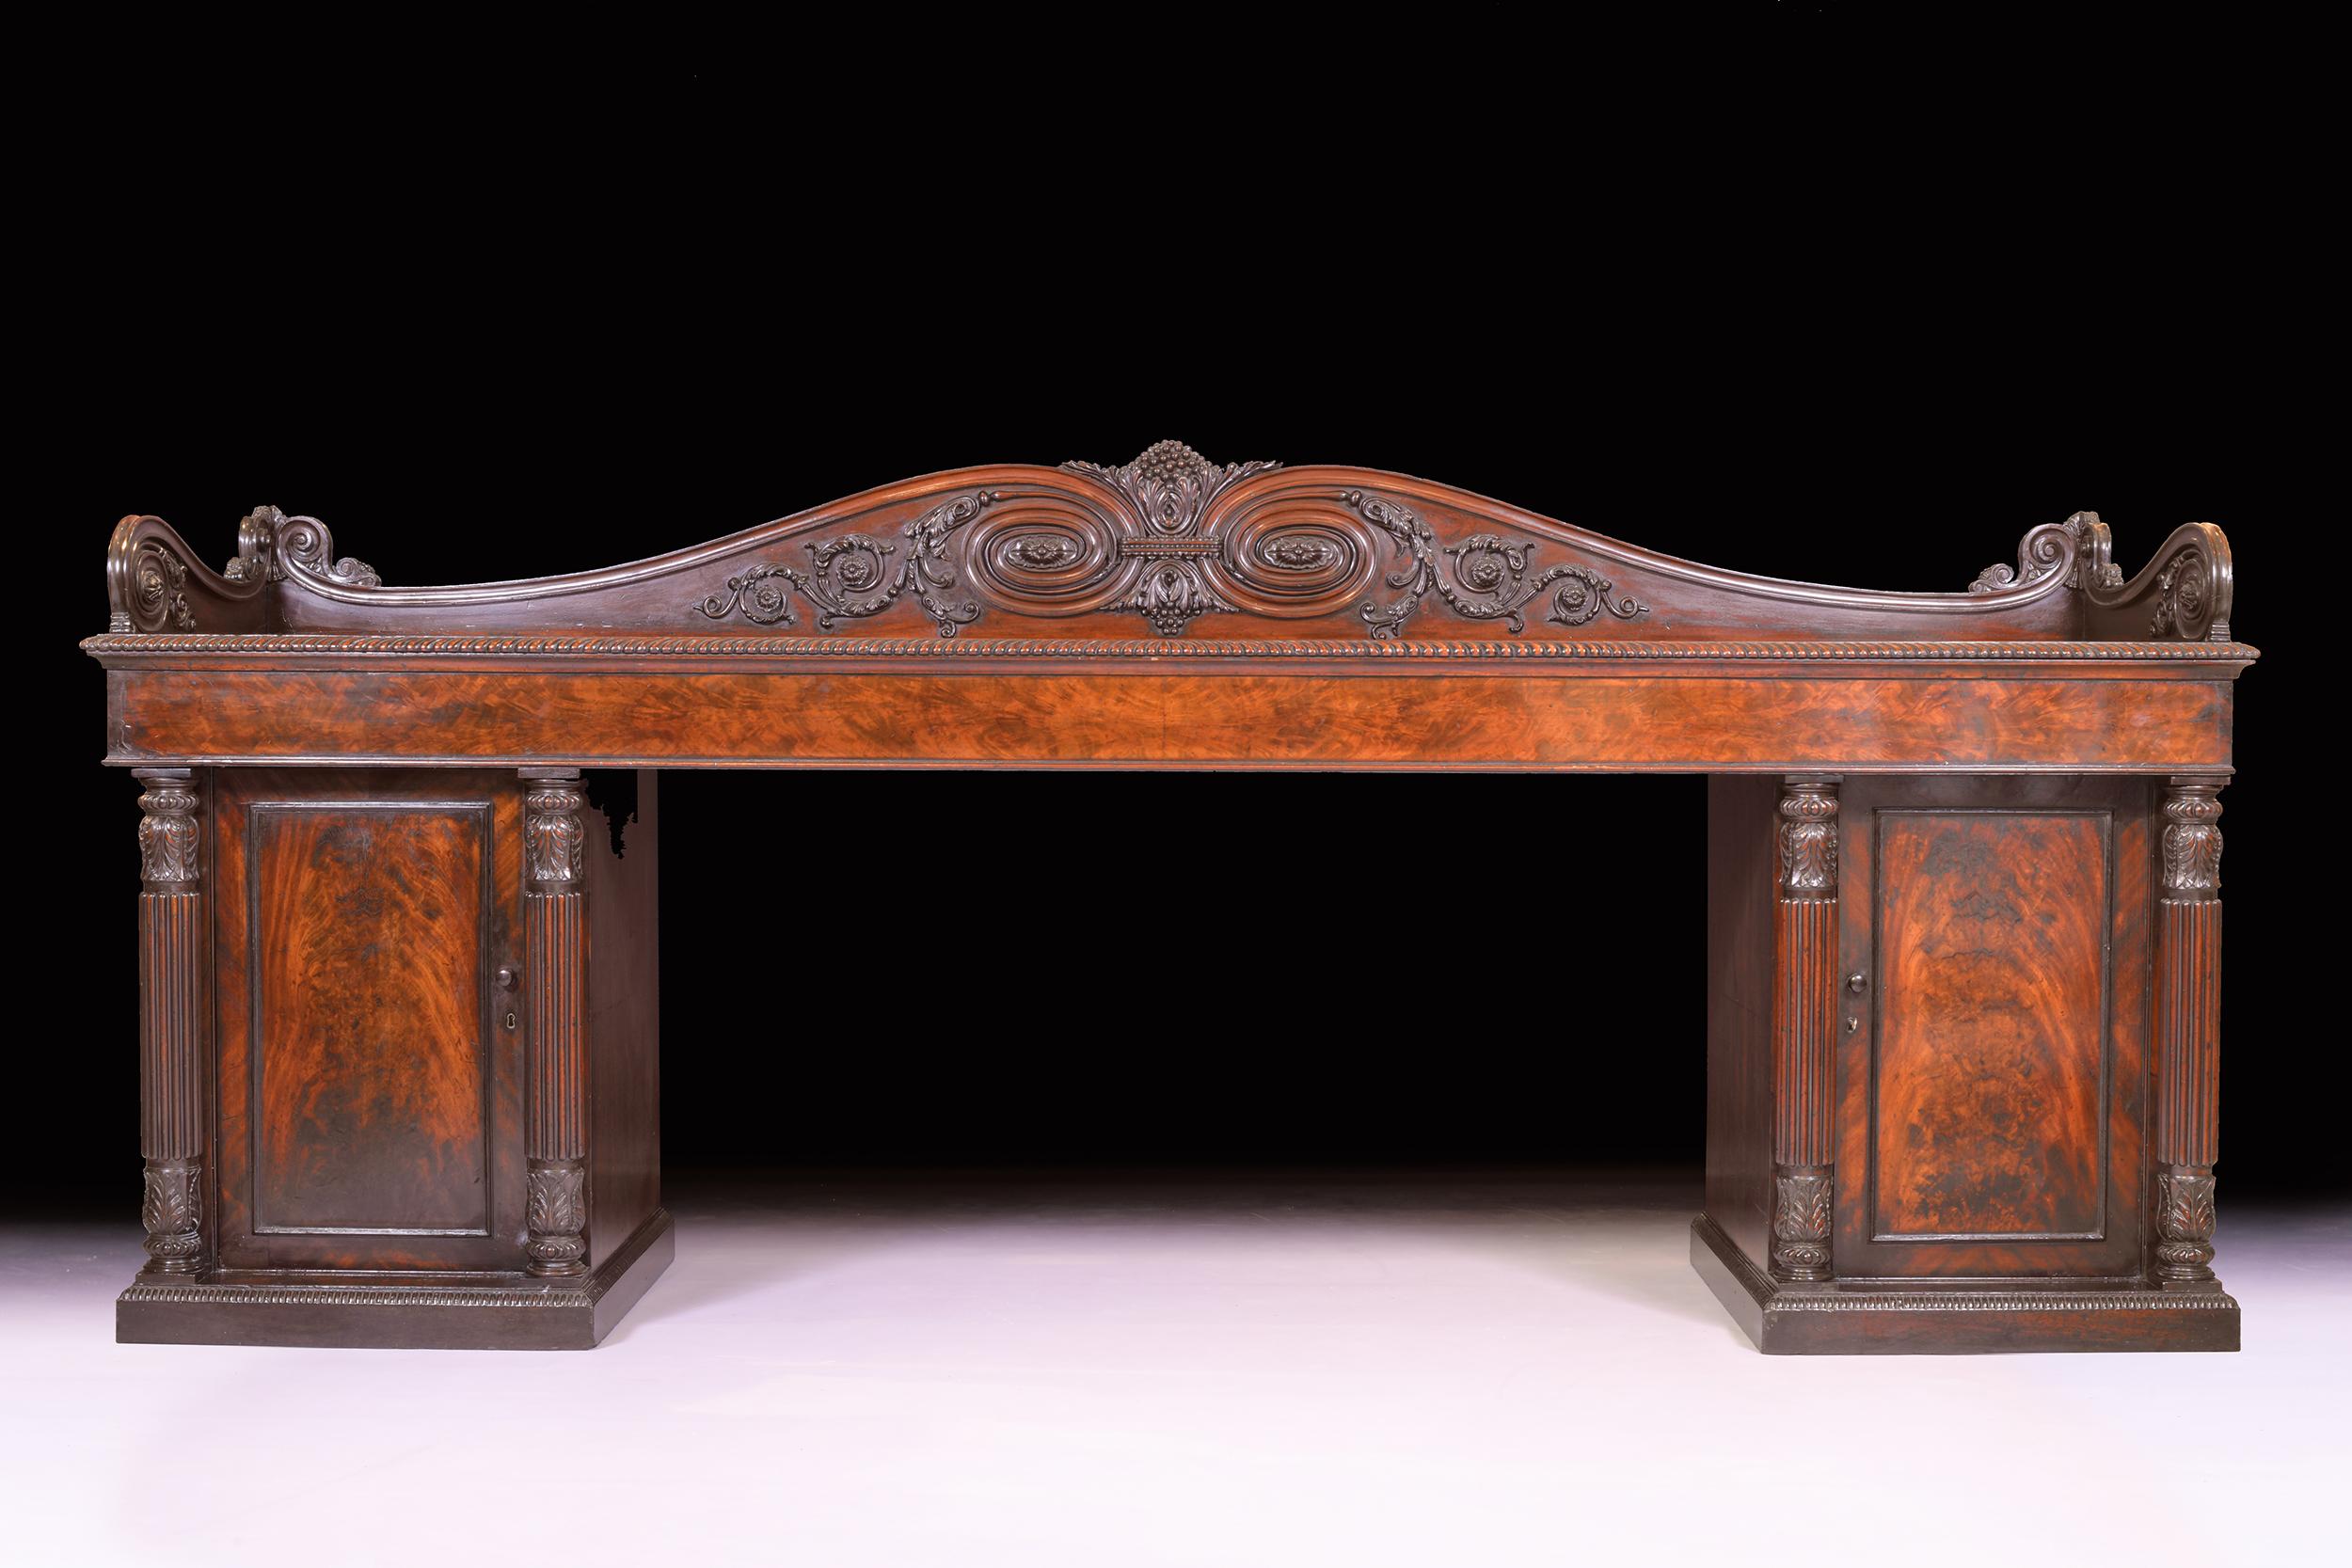 An exceptional quality mahogany monumental George IV figured mahogany pedestal sideboard attributed to Gillows of Lancaster, the rectangular top with a superbly carved back of Grecian scroll and bunches of grapes, above three frieze drawers, resting